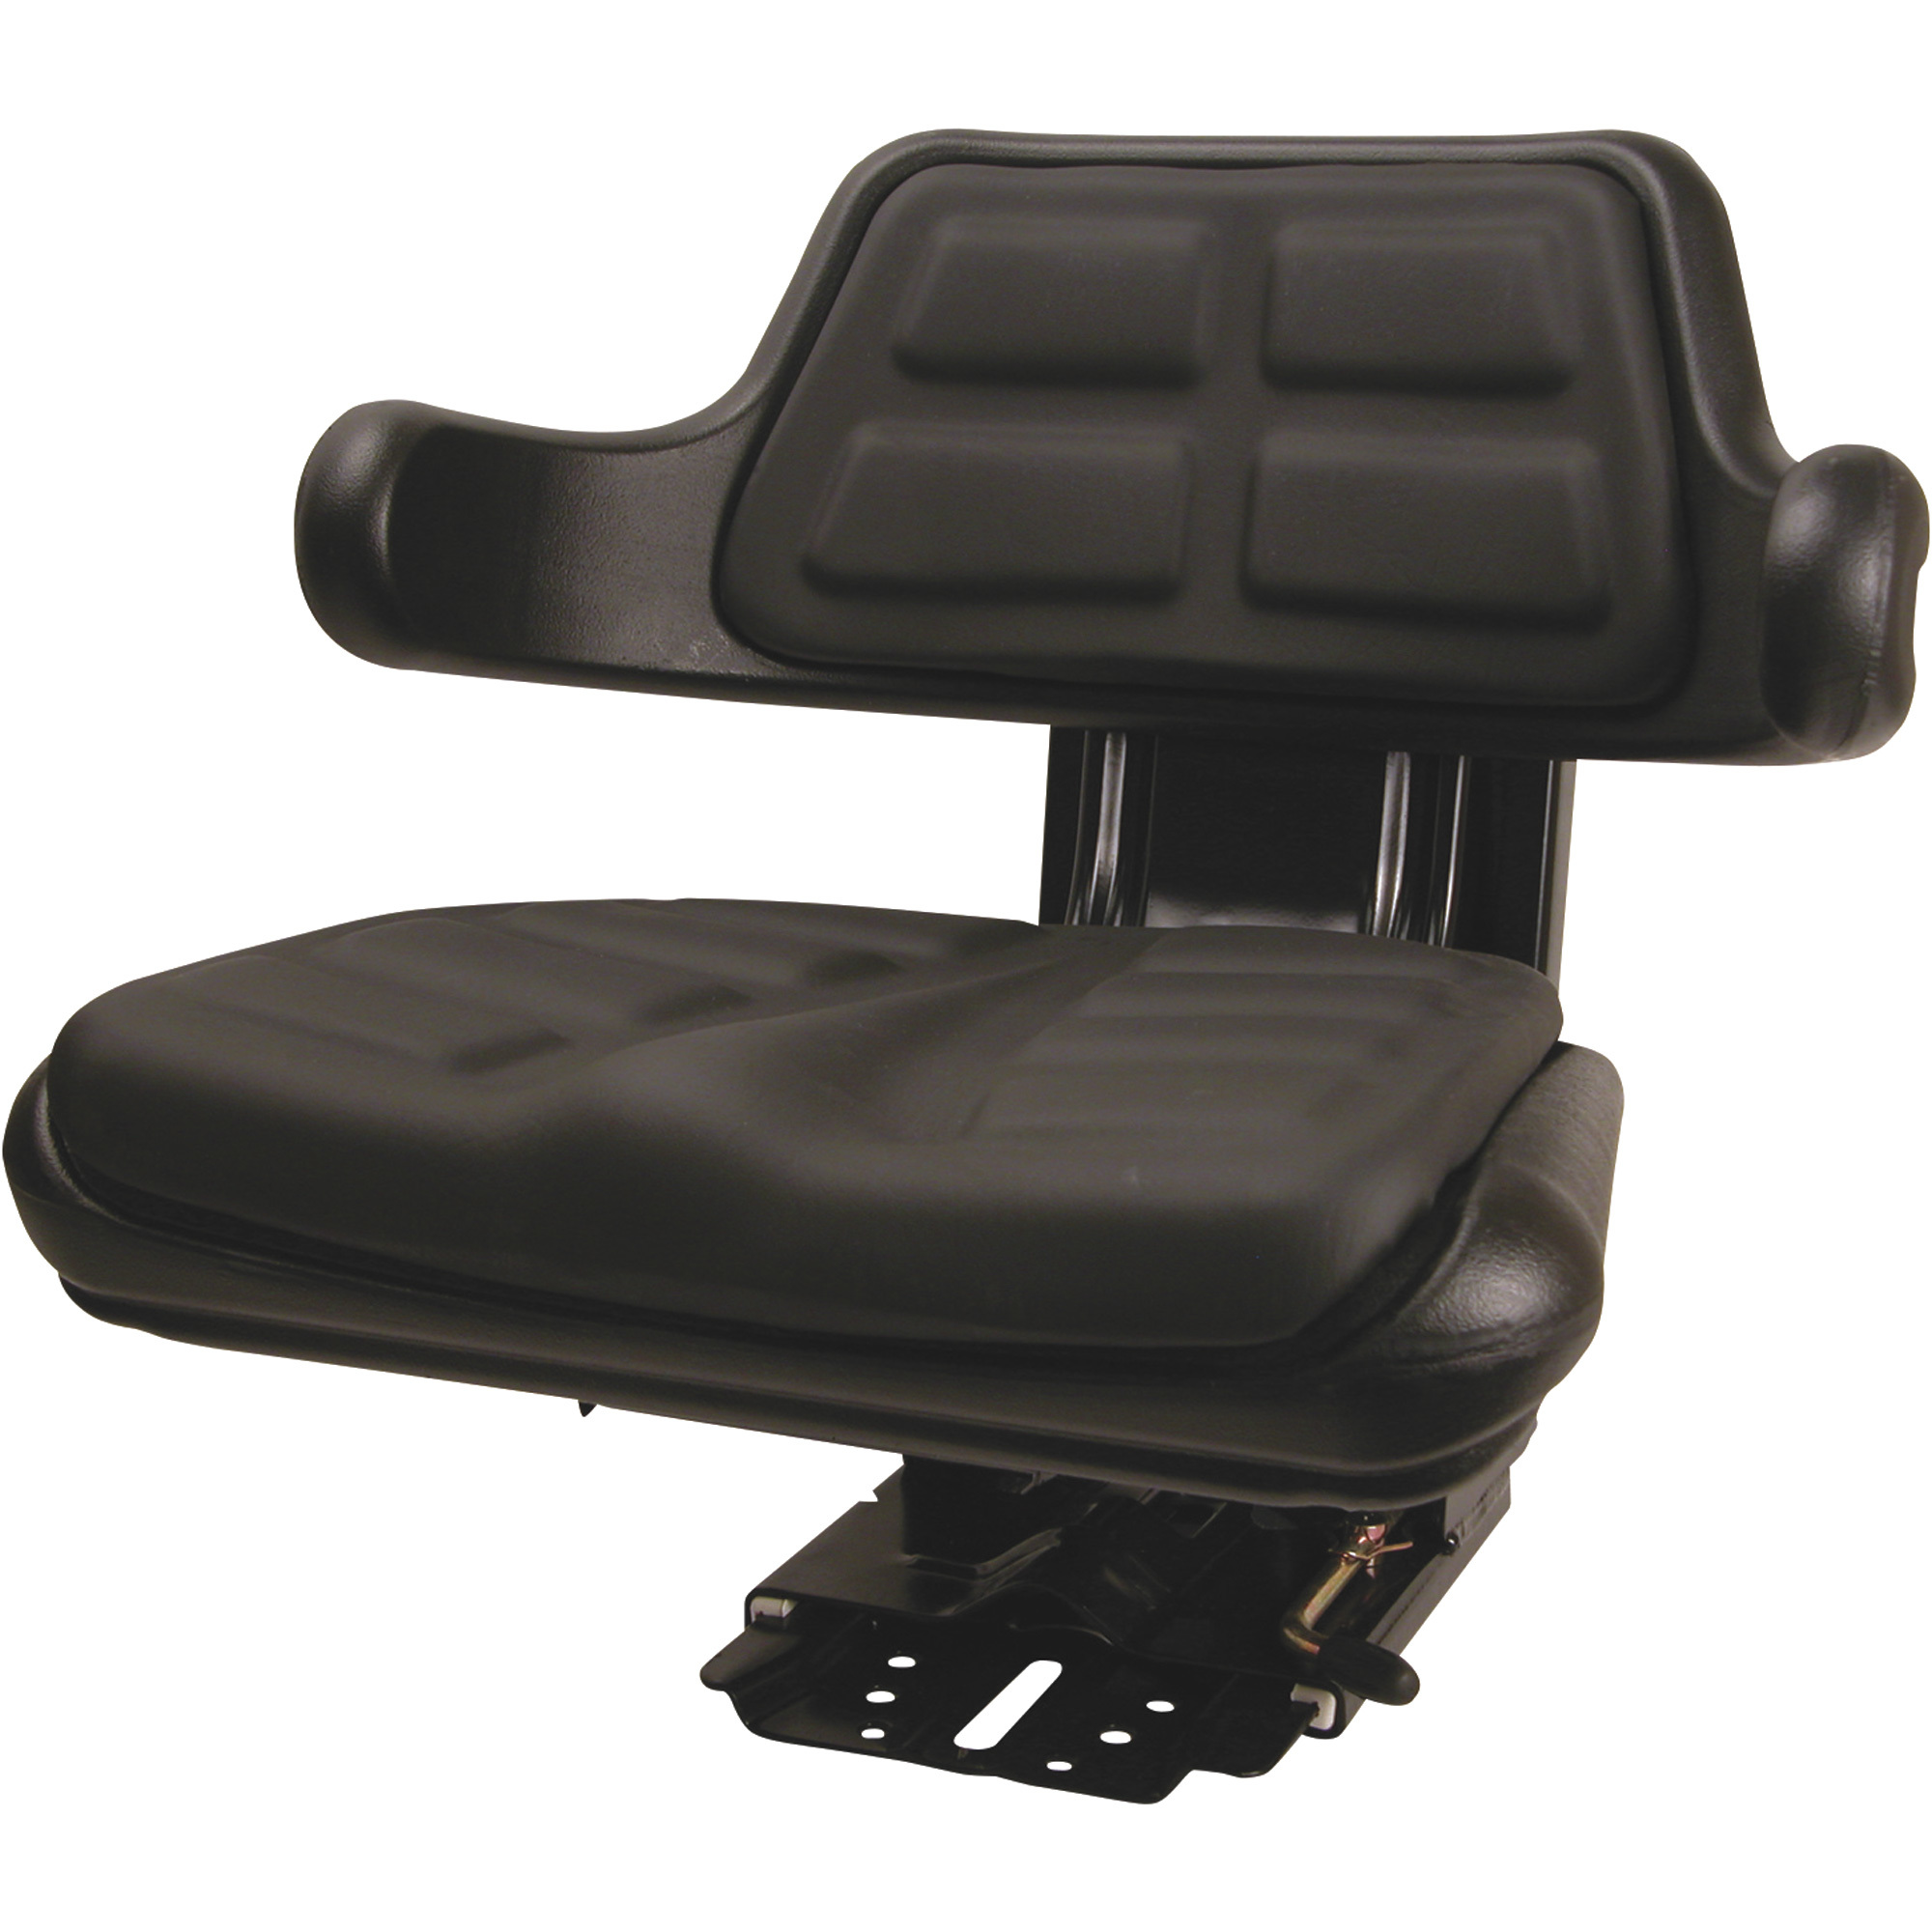 A & I 5-Position Tractor Seat â Black, Model W223BL